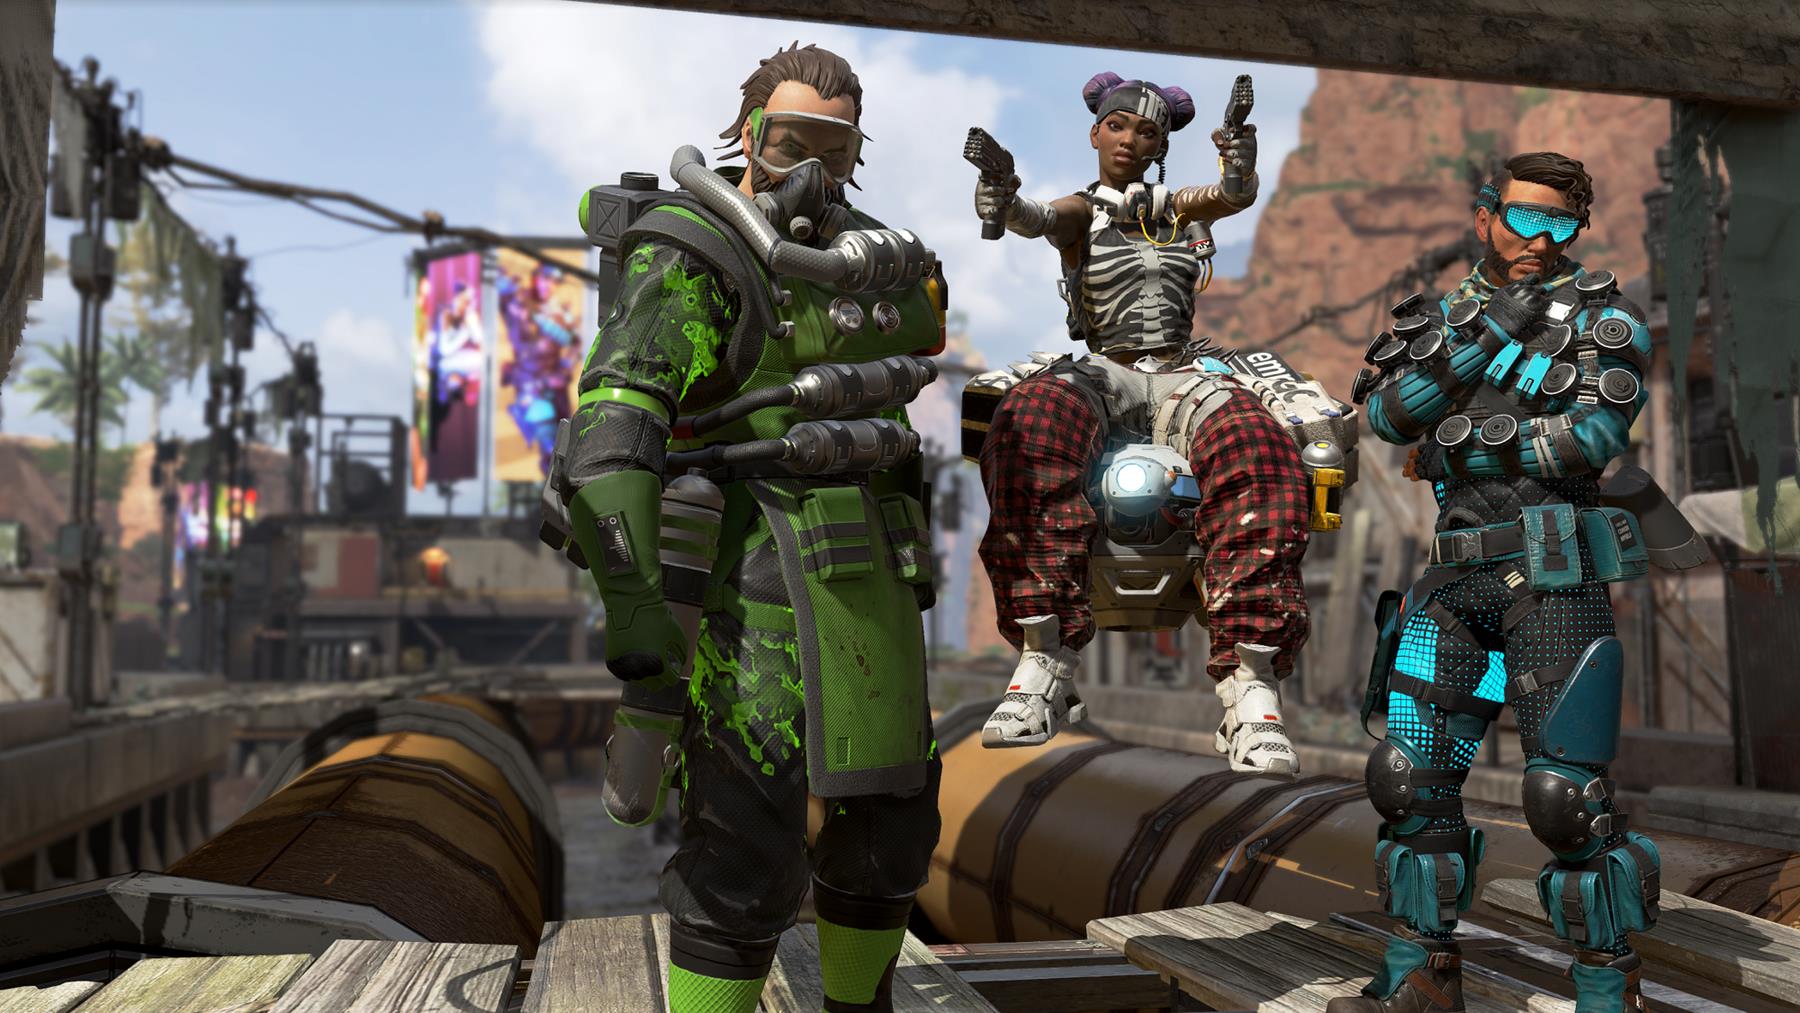 Apex Legends' netcode has big issues with lag, server tickrate - report |  VG247